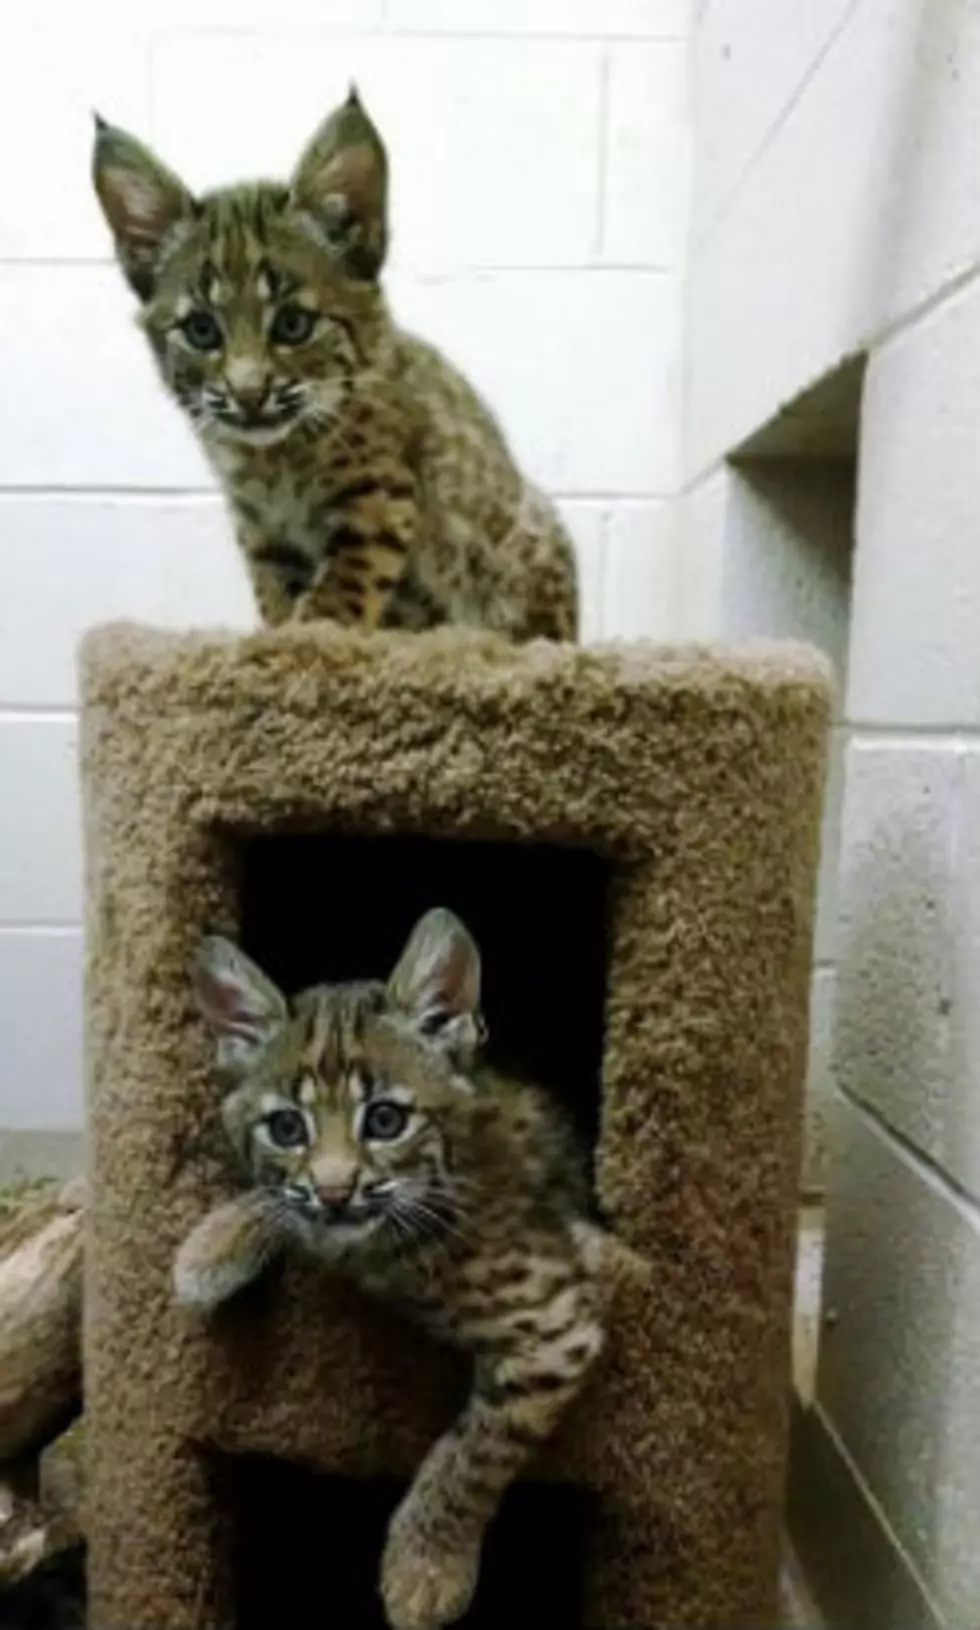 What Should They Name The New Baby Bobcat Kittens At Buttonwood Park Zoo?